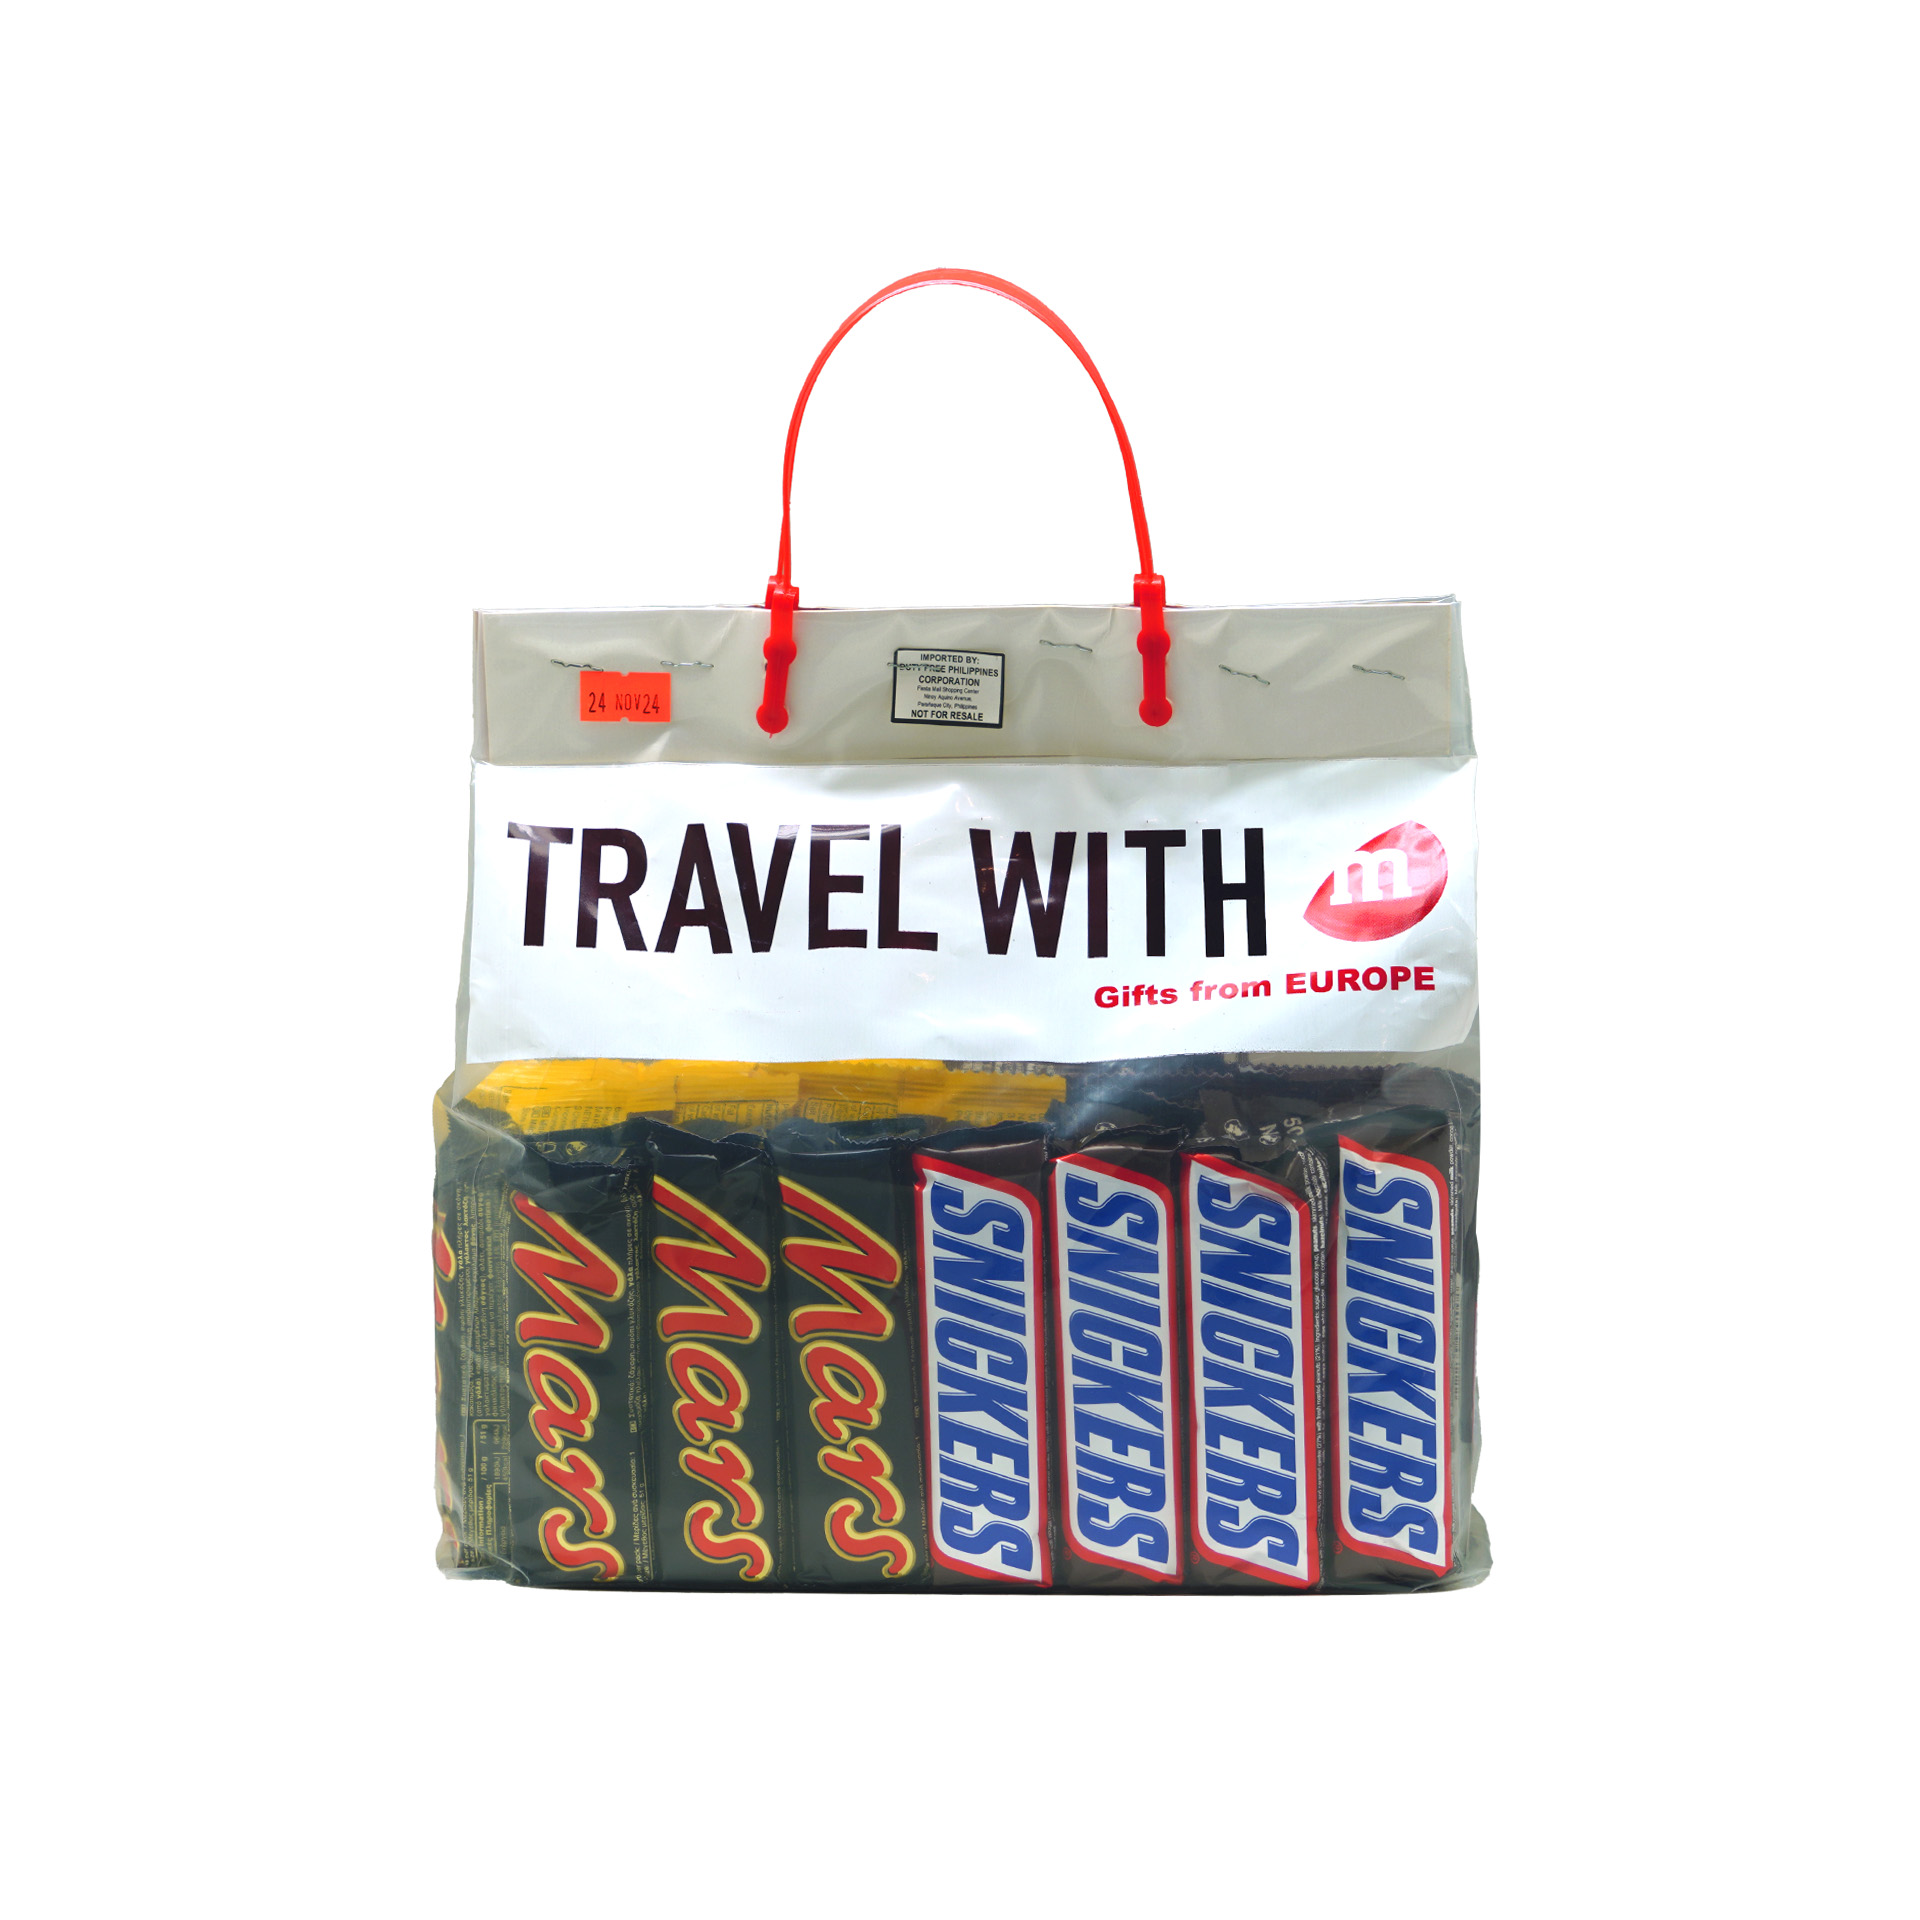 M&M's and Snickers Assorted Bars Pasalubong Bag (41 pcs)